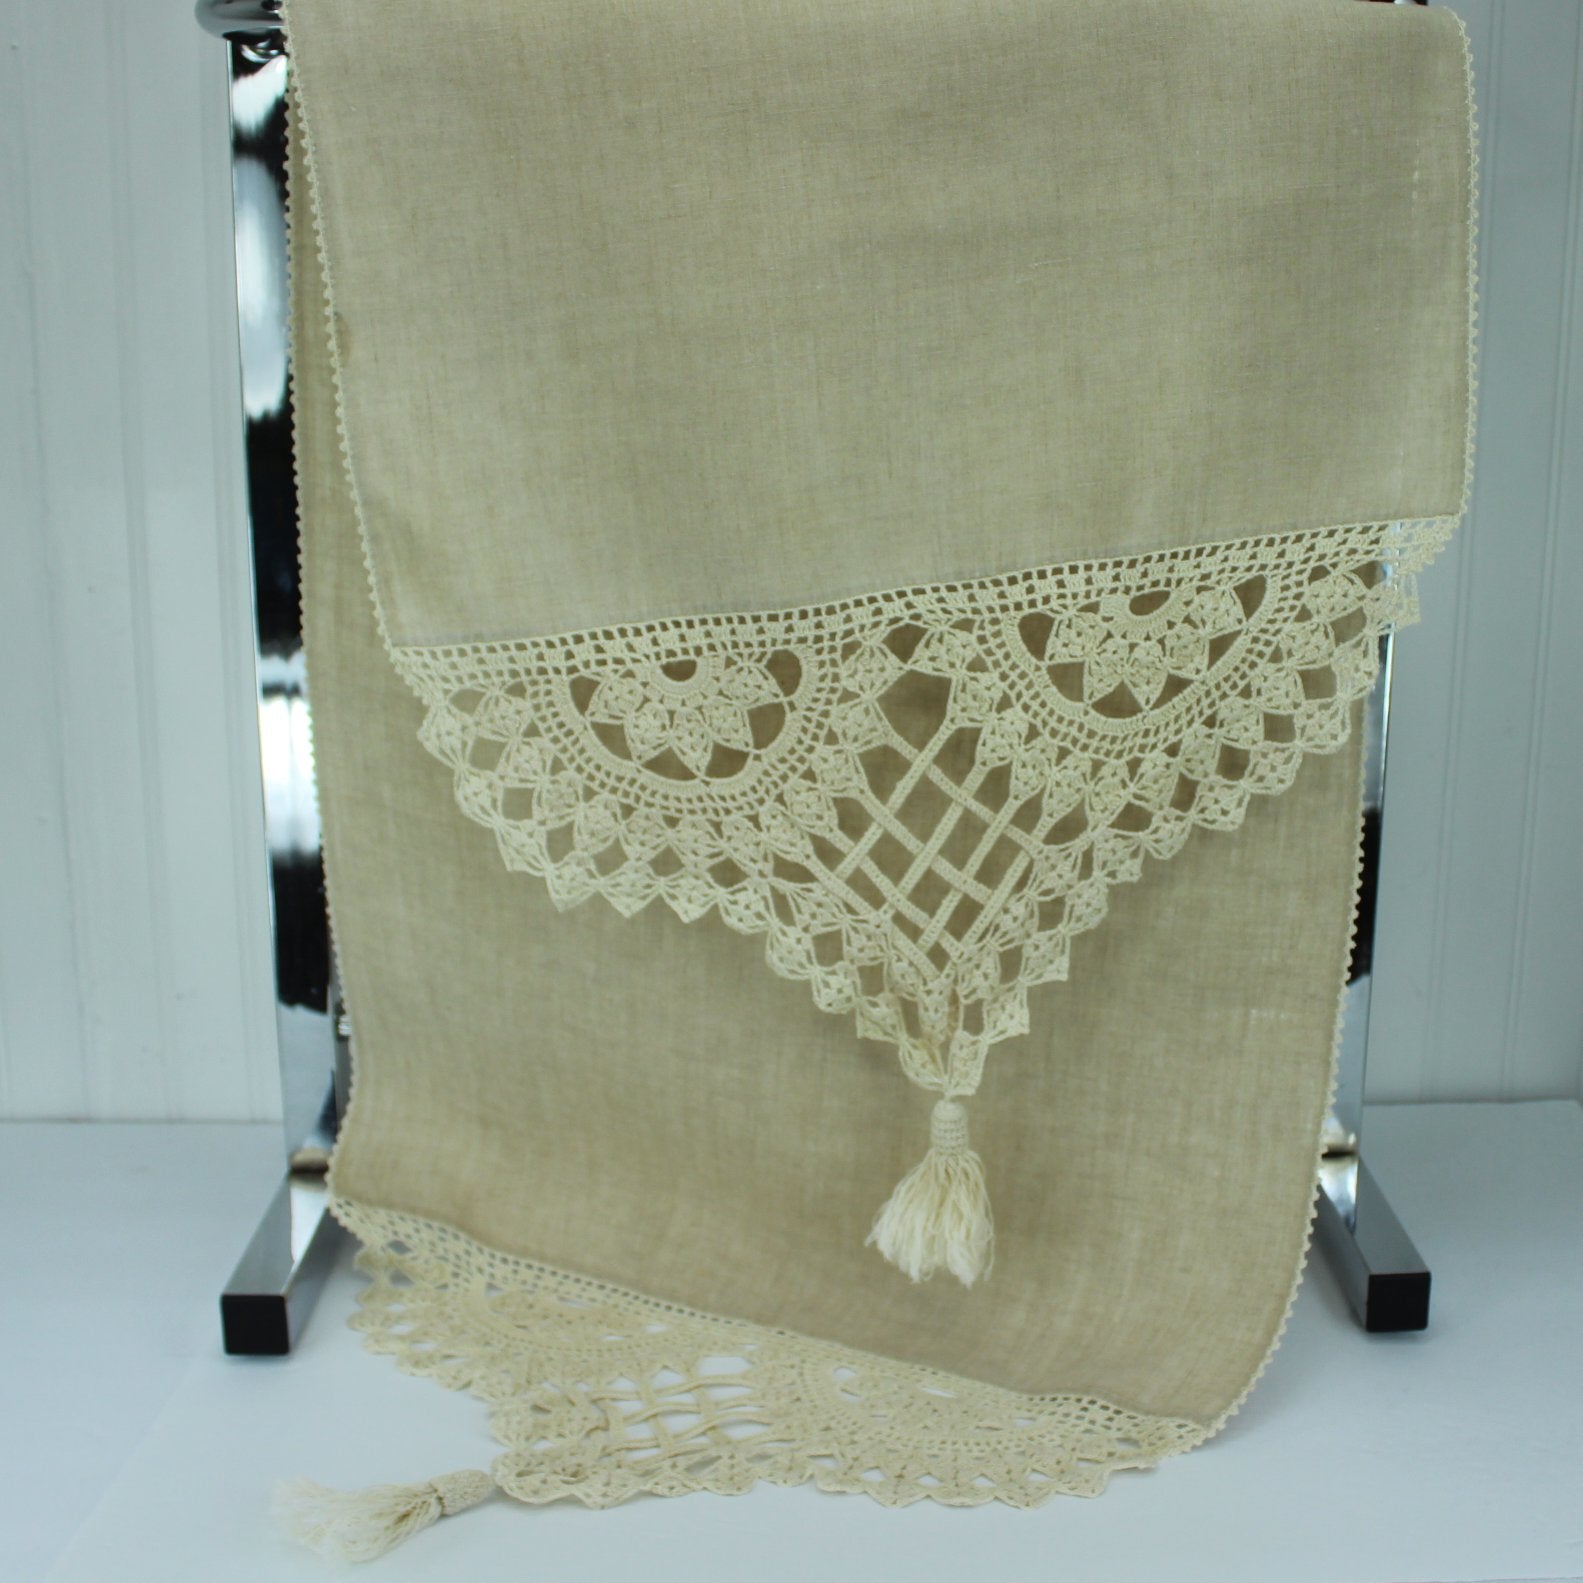 Long Antique Tassel Table Runner Natural Linen Lattice Work Crochet Great for Shawl Too showing both ends